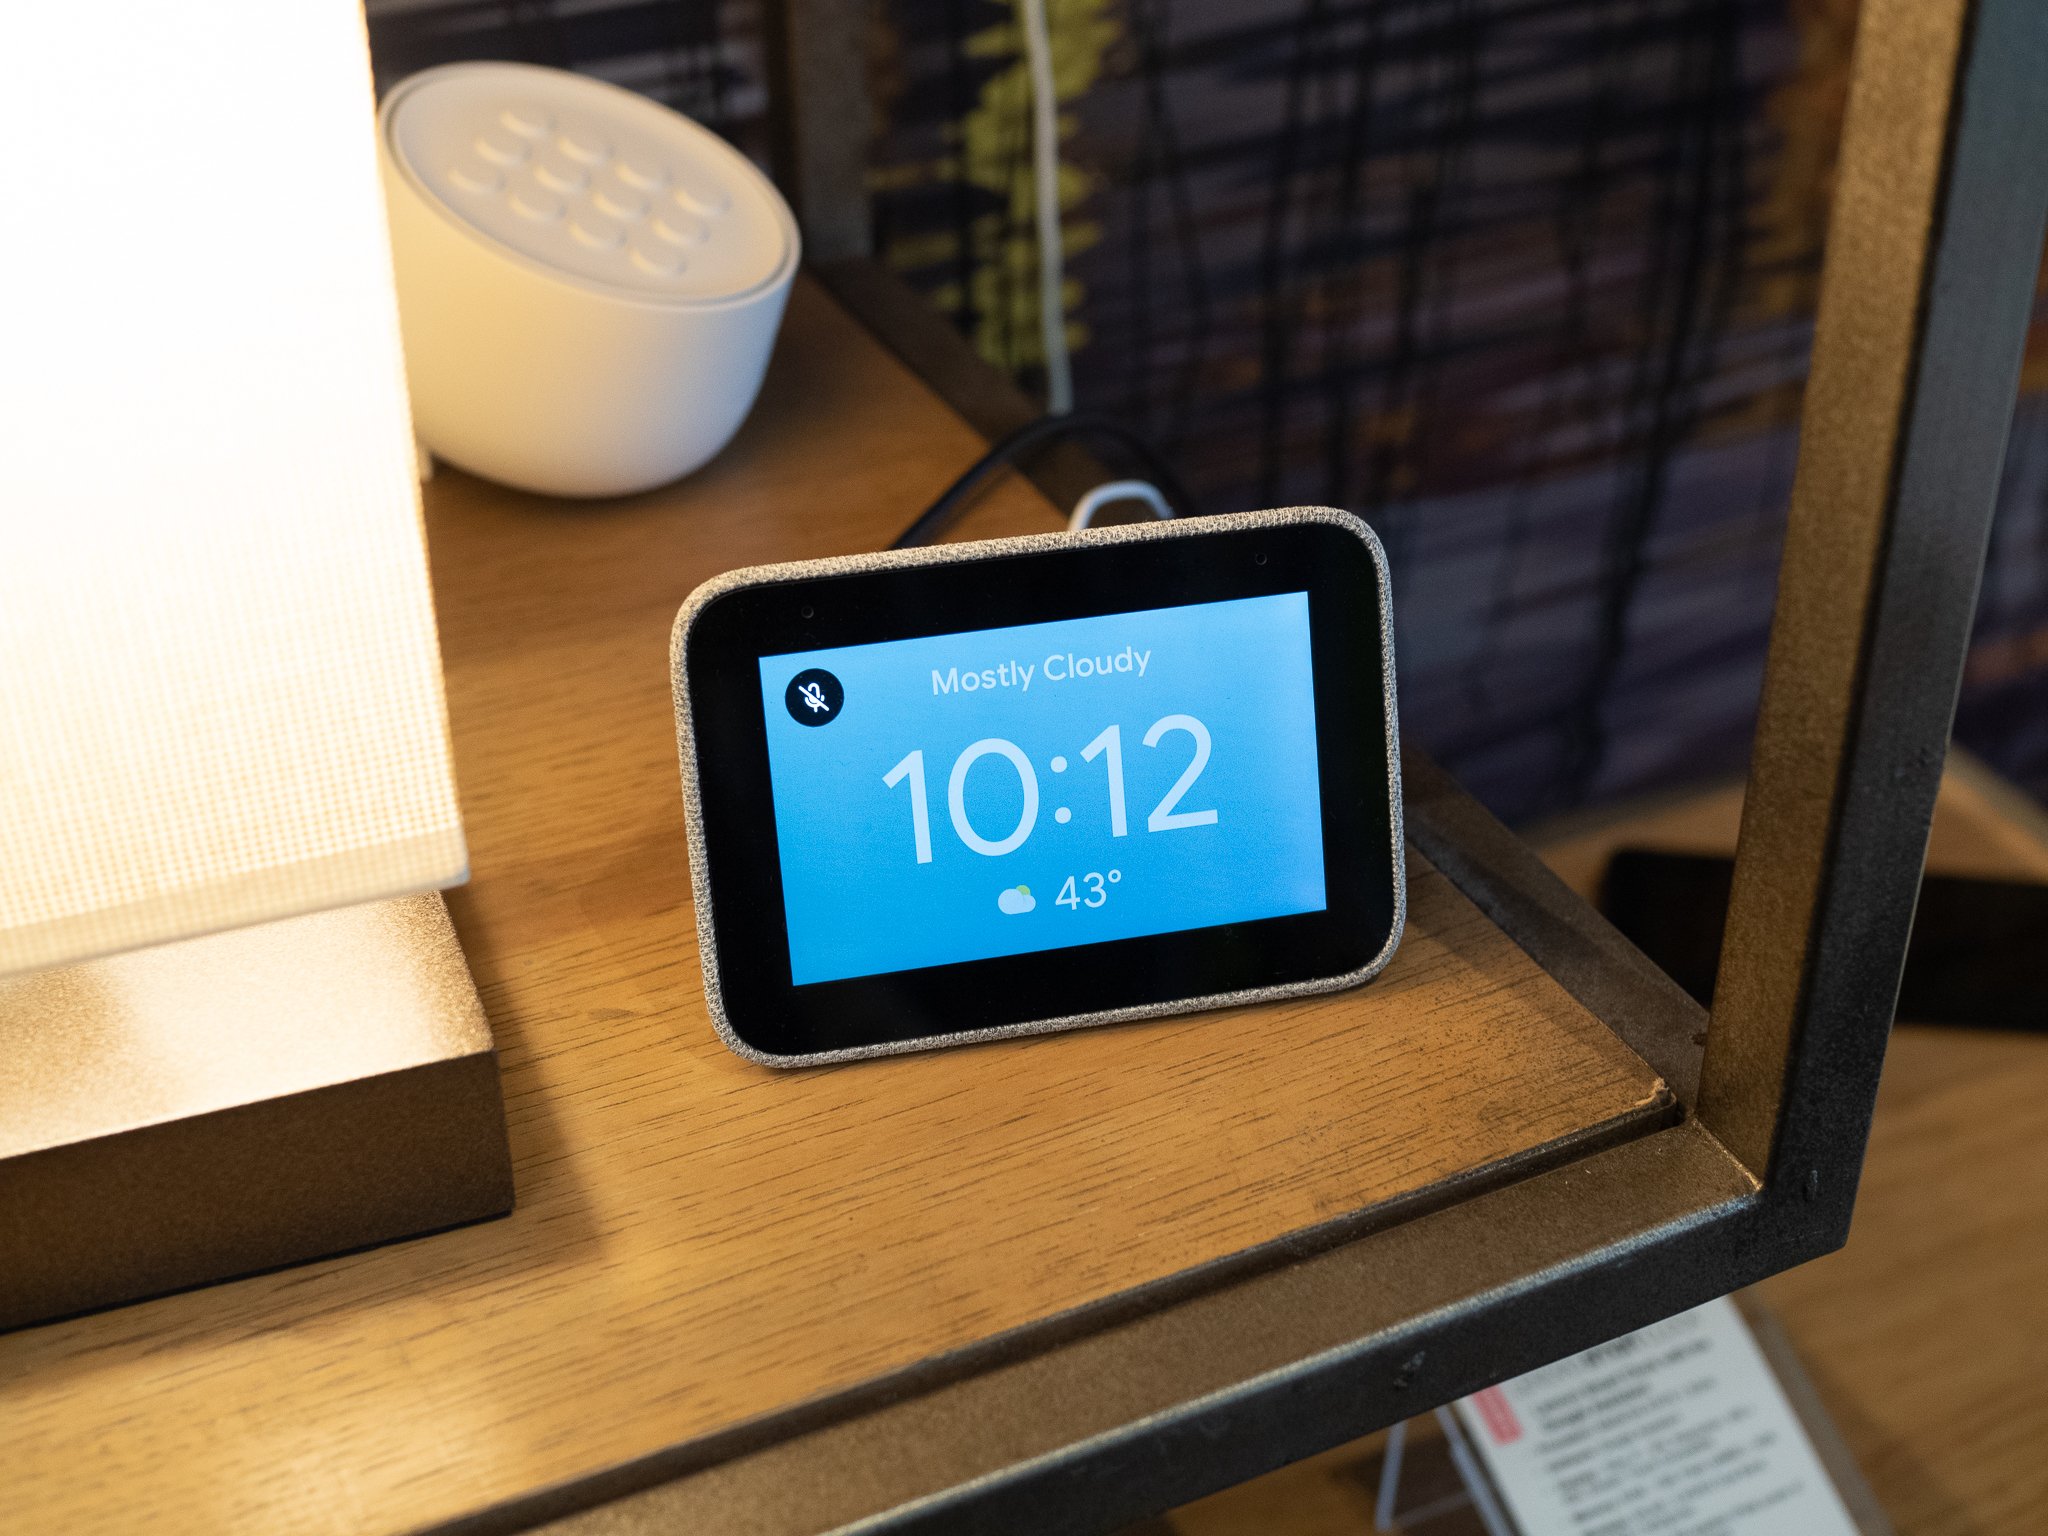 Lenovo’s new Smart Clock brings Google Assistant to your nightstand